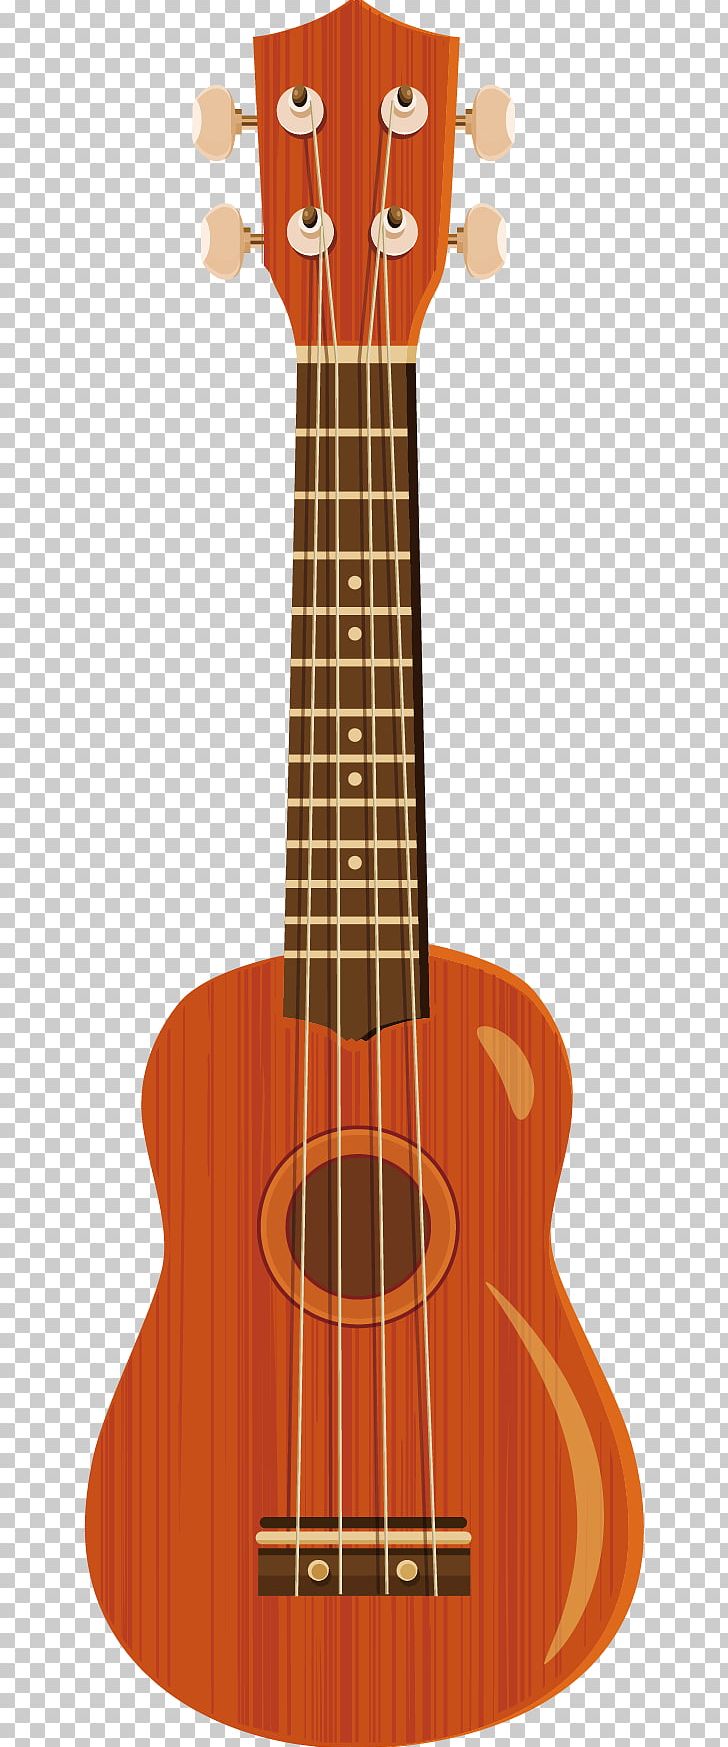 Ukulele Bass Guitar Acoustic Guitar Tiple PNG, Clipart, Acoustic, Cuatro, Folk, Guitar Accessory, Happy Birthday Vector Images Free PNG Download